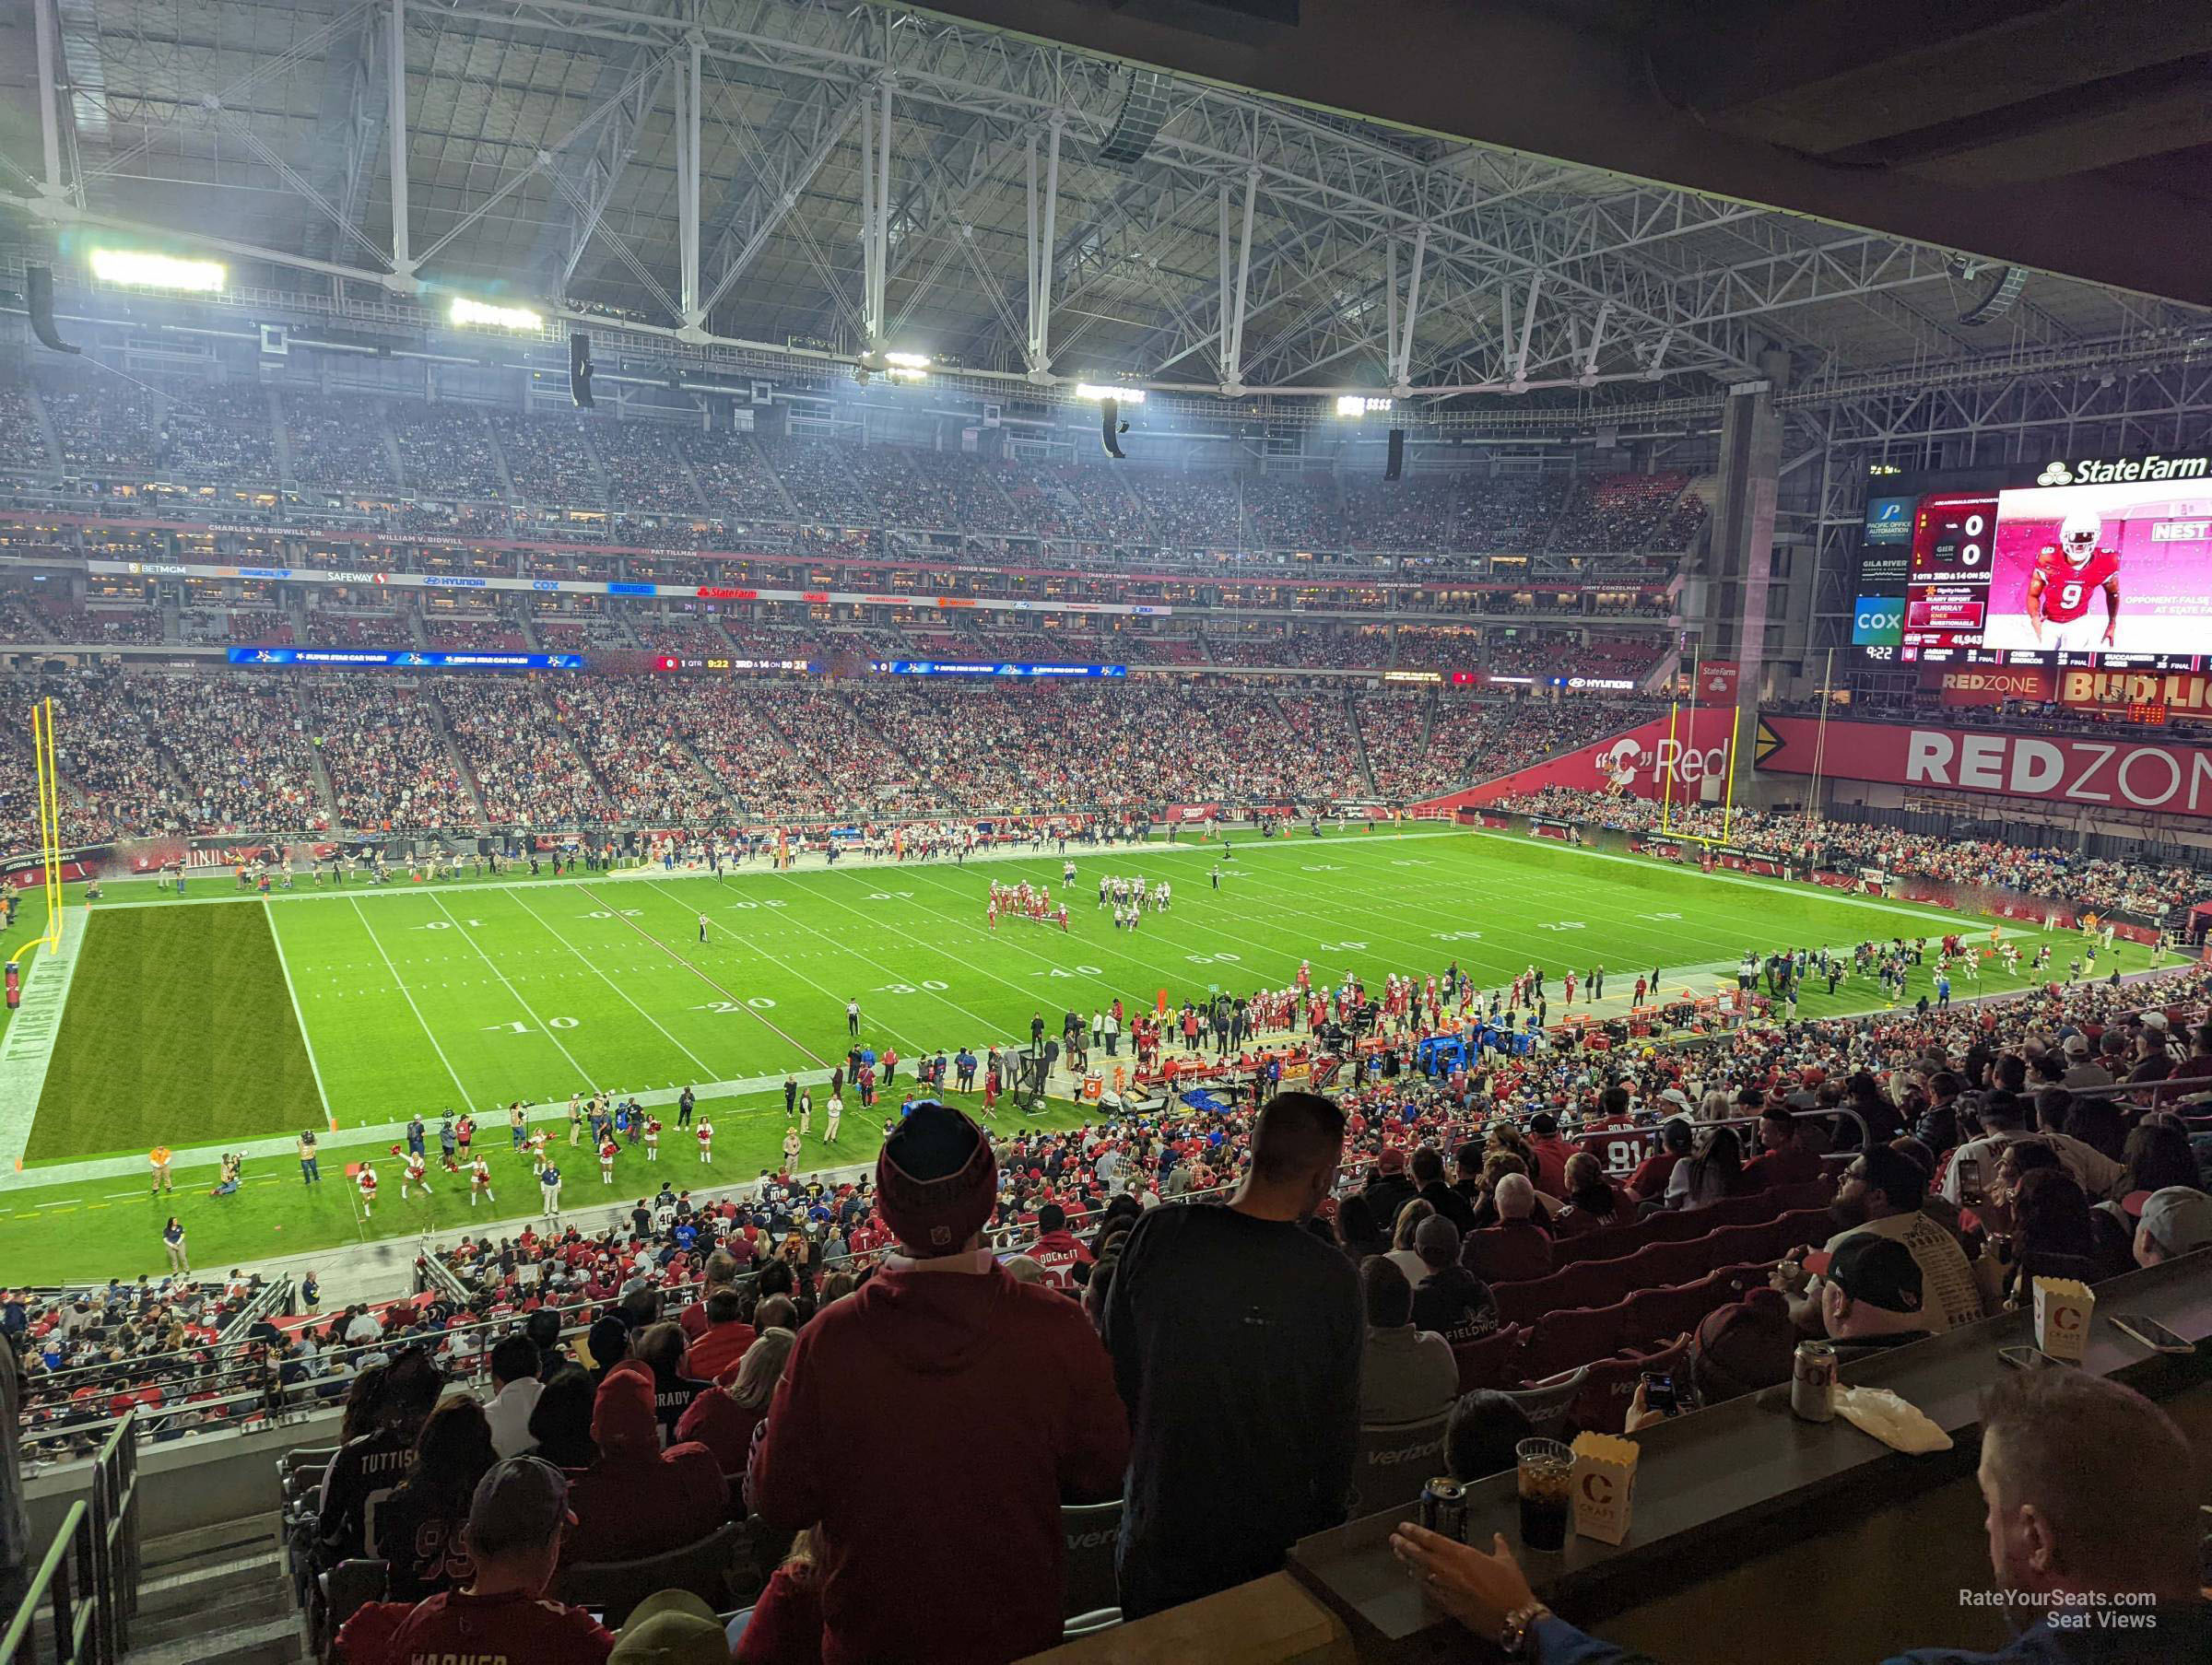 section 216, row 12 seat view  for football - state farm stadium